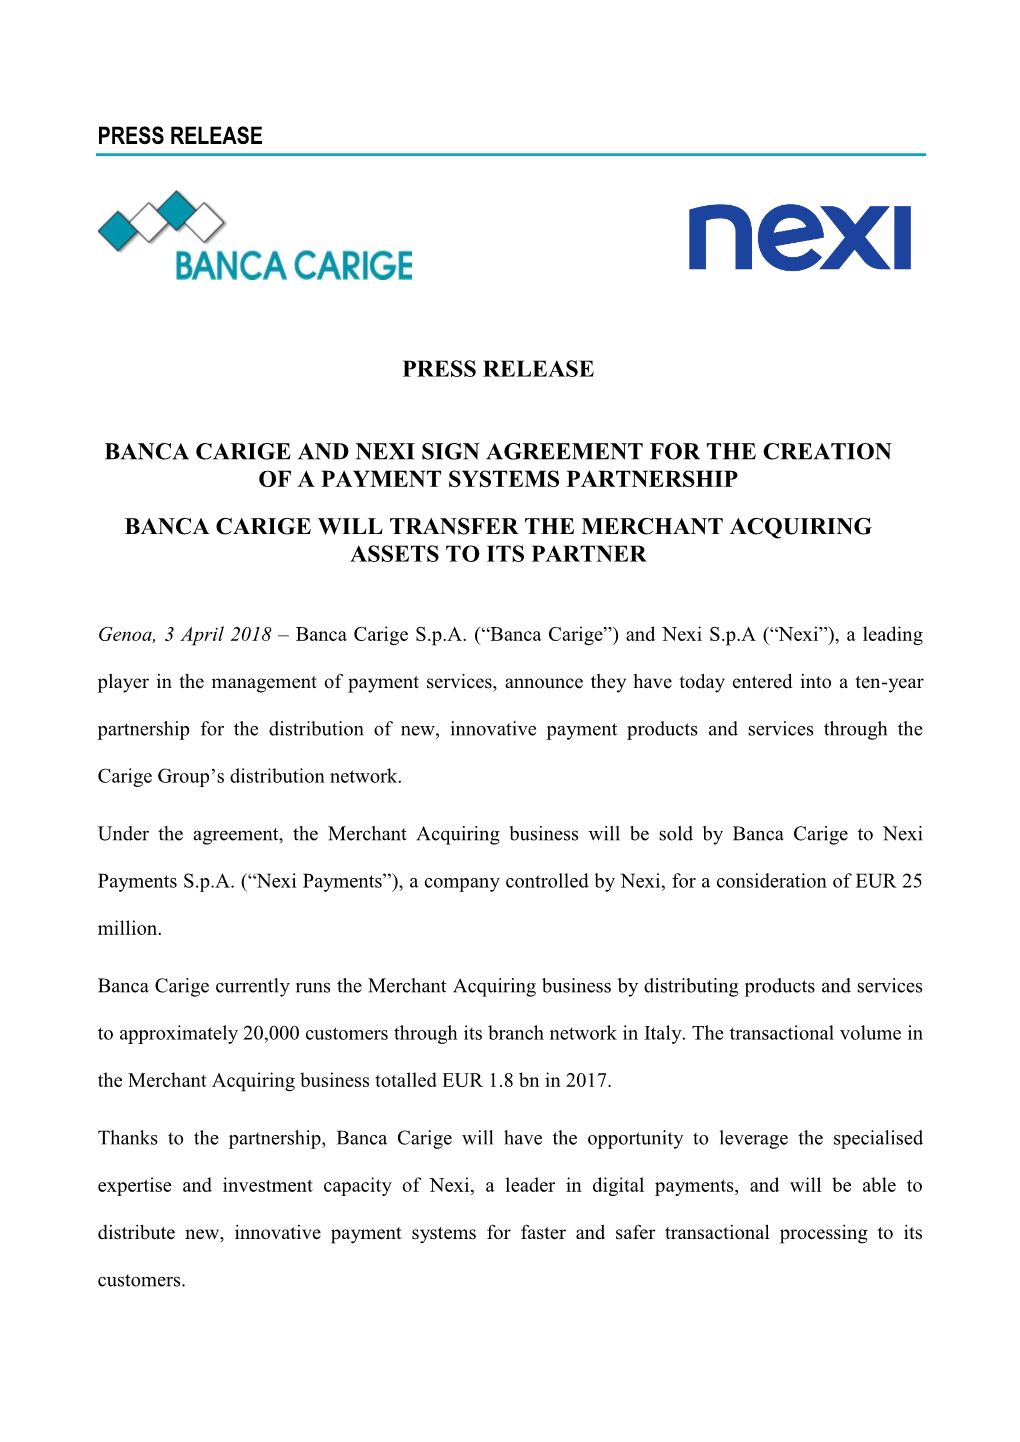 Banca Carige and Nexi Sign Agreement for the Creation of a Payment Systems Partnership